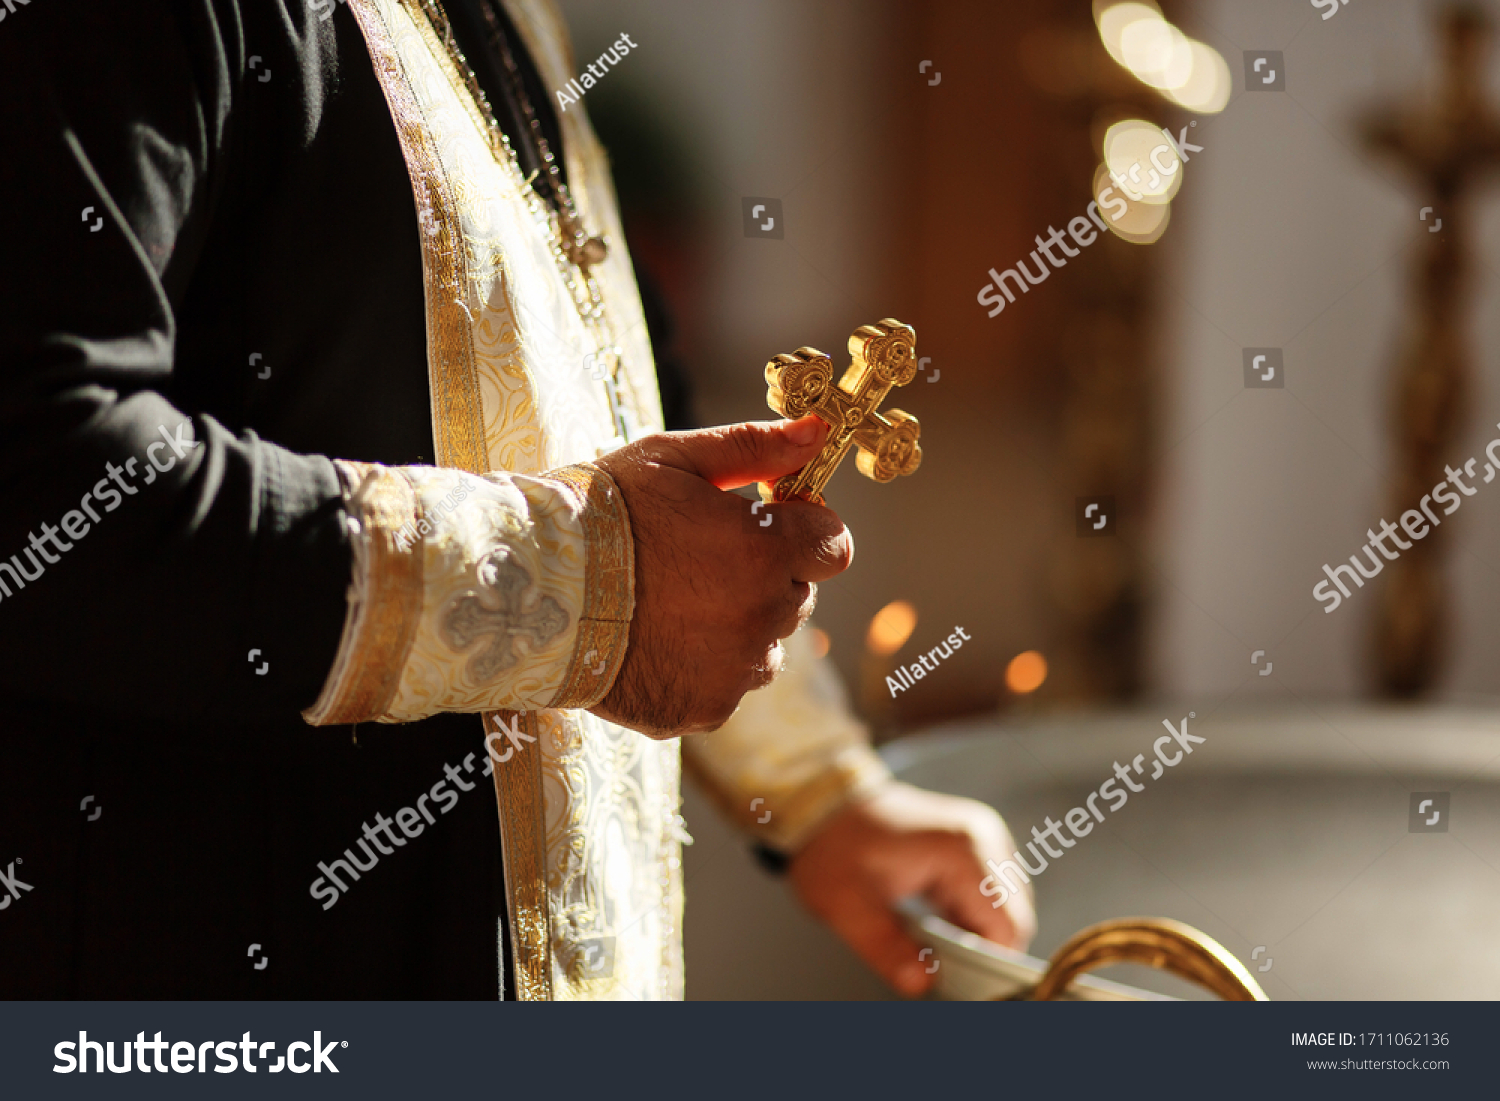 Russian Eastern orthodox church priest holds an orthodox cross in a hand. Close-up photo #1711062136